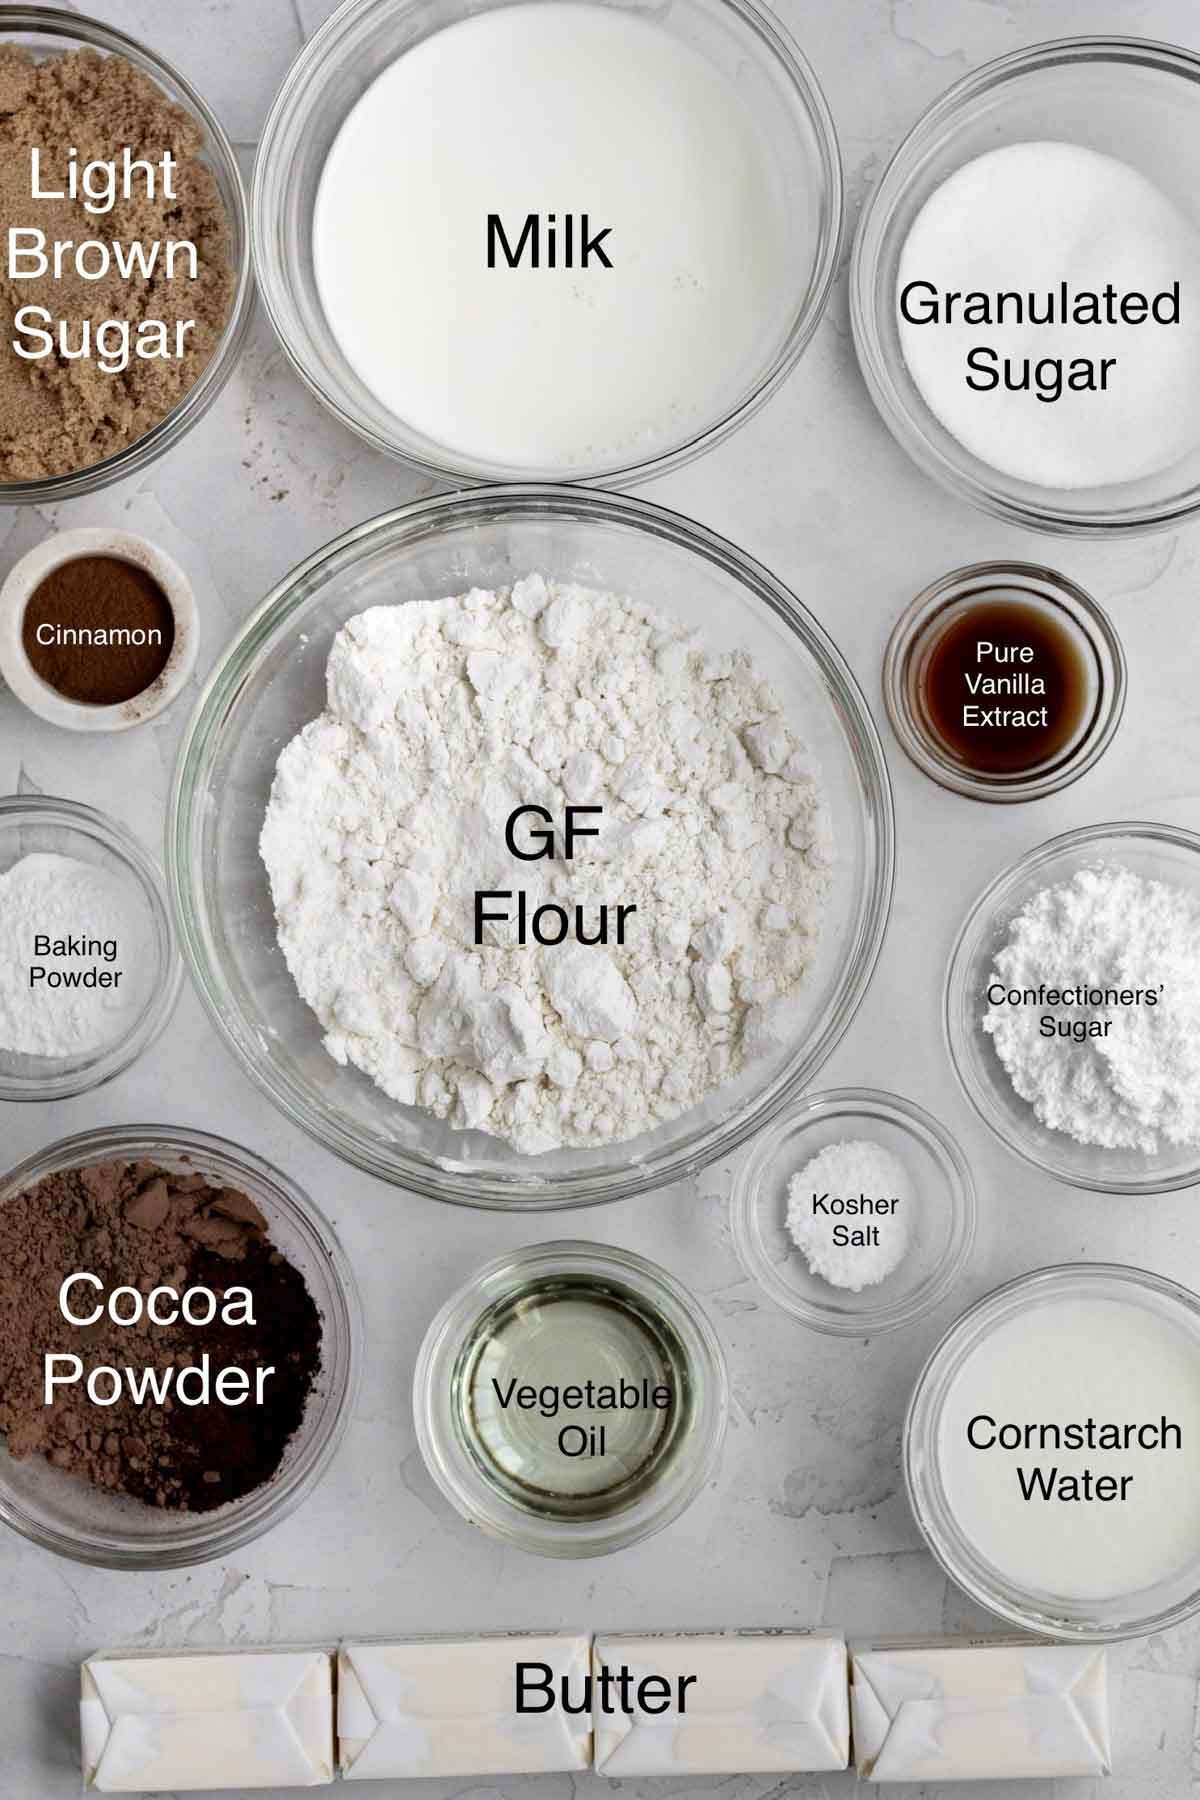 Light brown sugar, milk, granulated sugar, cinnamon, gluten free flour, pure vanilla extract, baking powder, confectioners' sugar, cocoa powder, vegetable oil, kosher salt, cornstarch water and butter in separate containers.